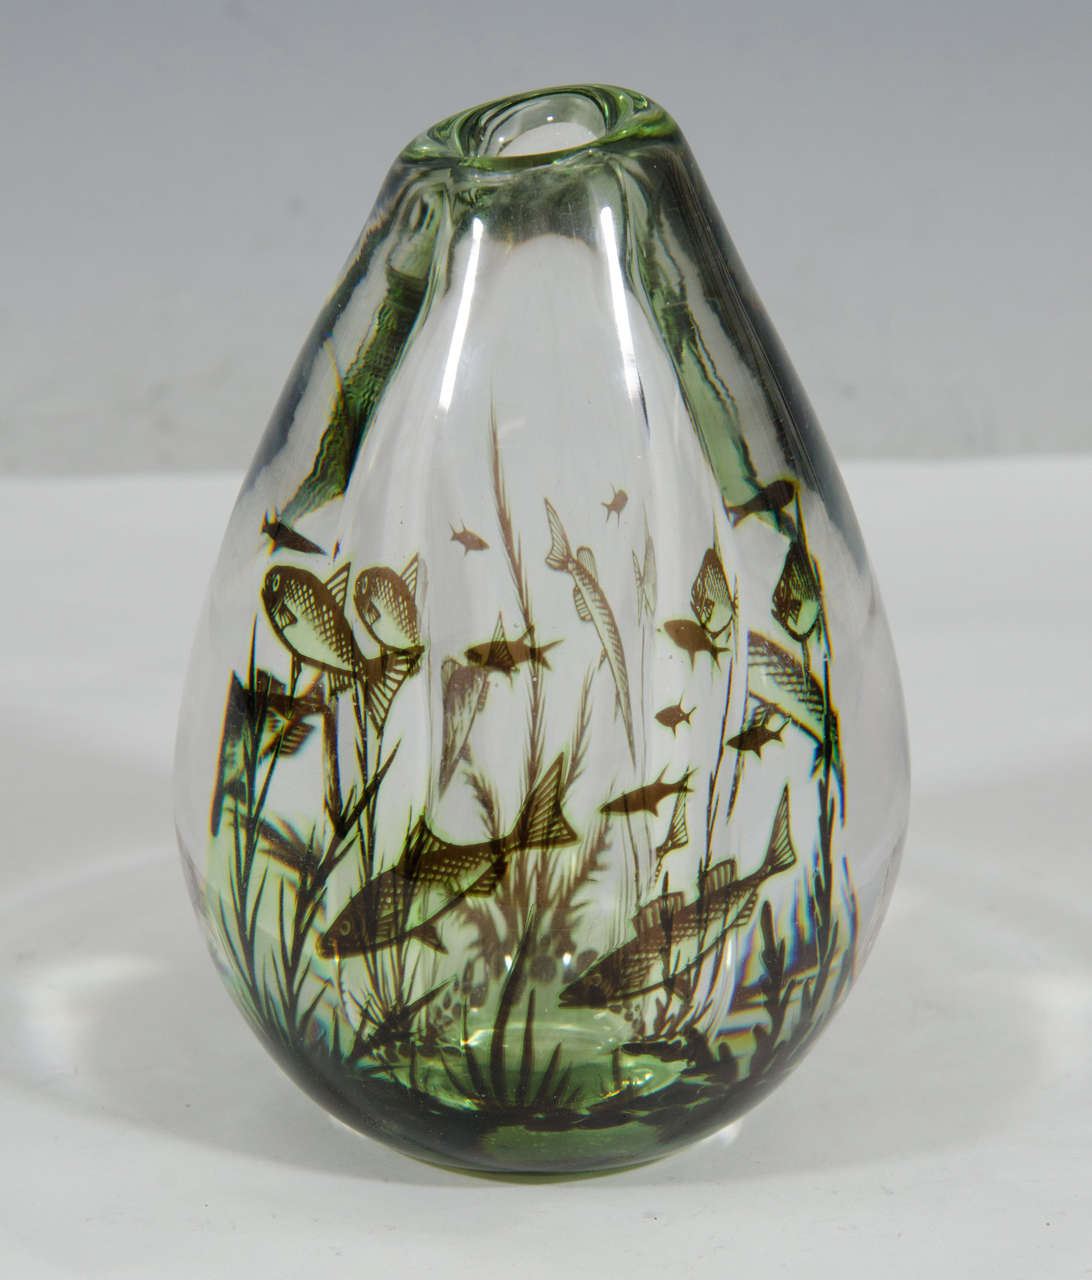 A vintage heavy crystal art glass vase in Graal technique with inner decoration of fish and seaweed. Signed on bottom: Graal No 478N by Edward Hald for Orrefors.